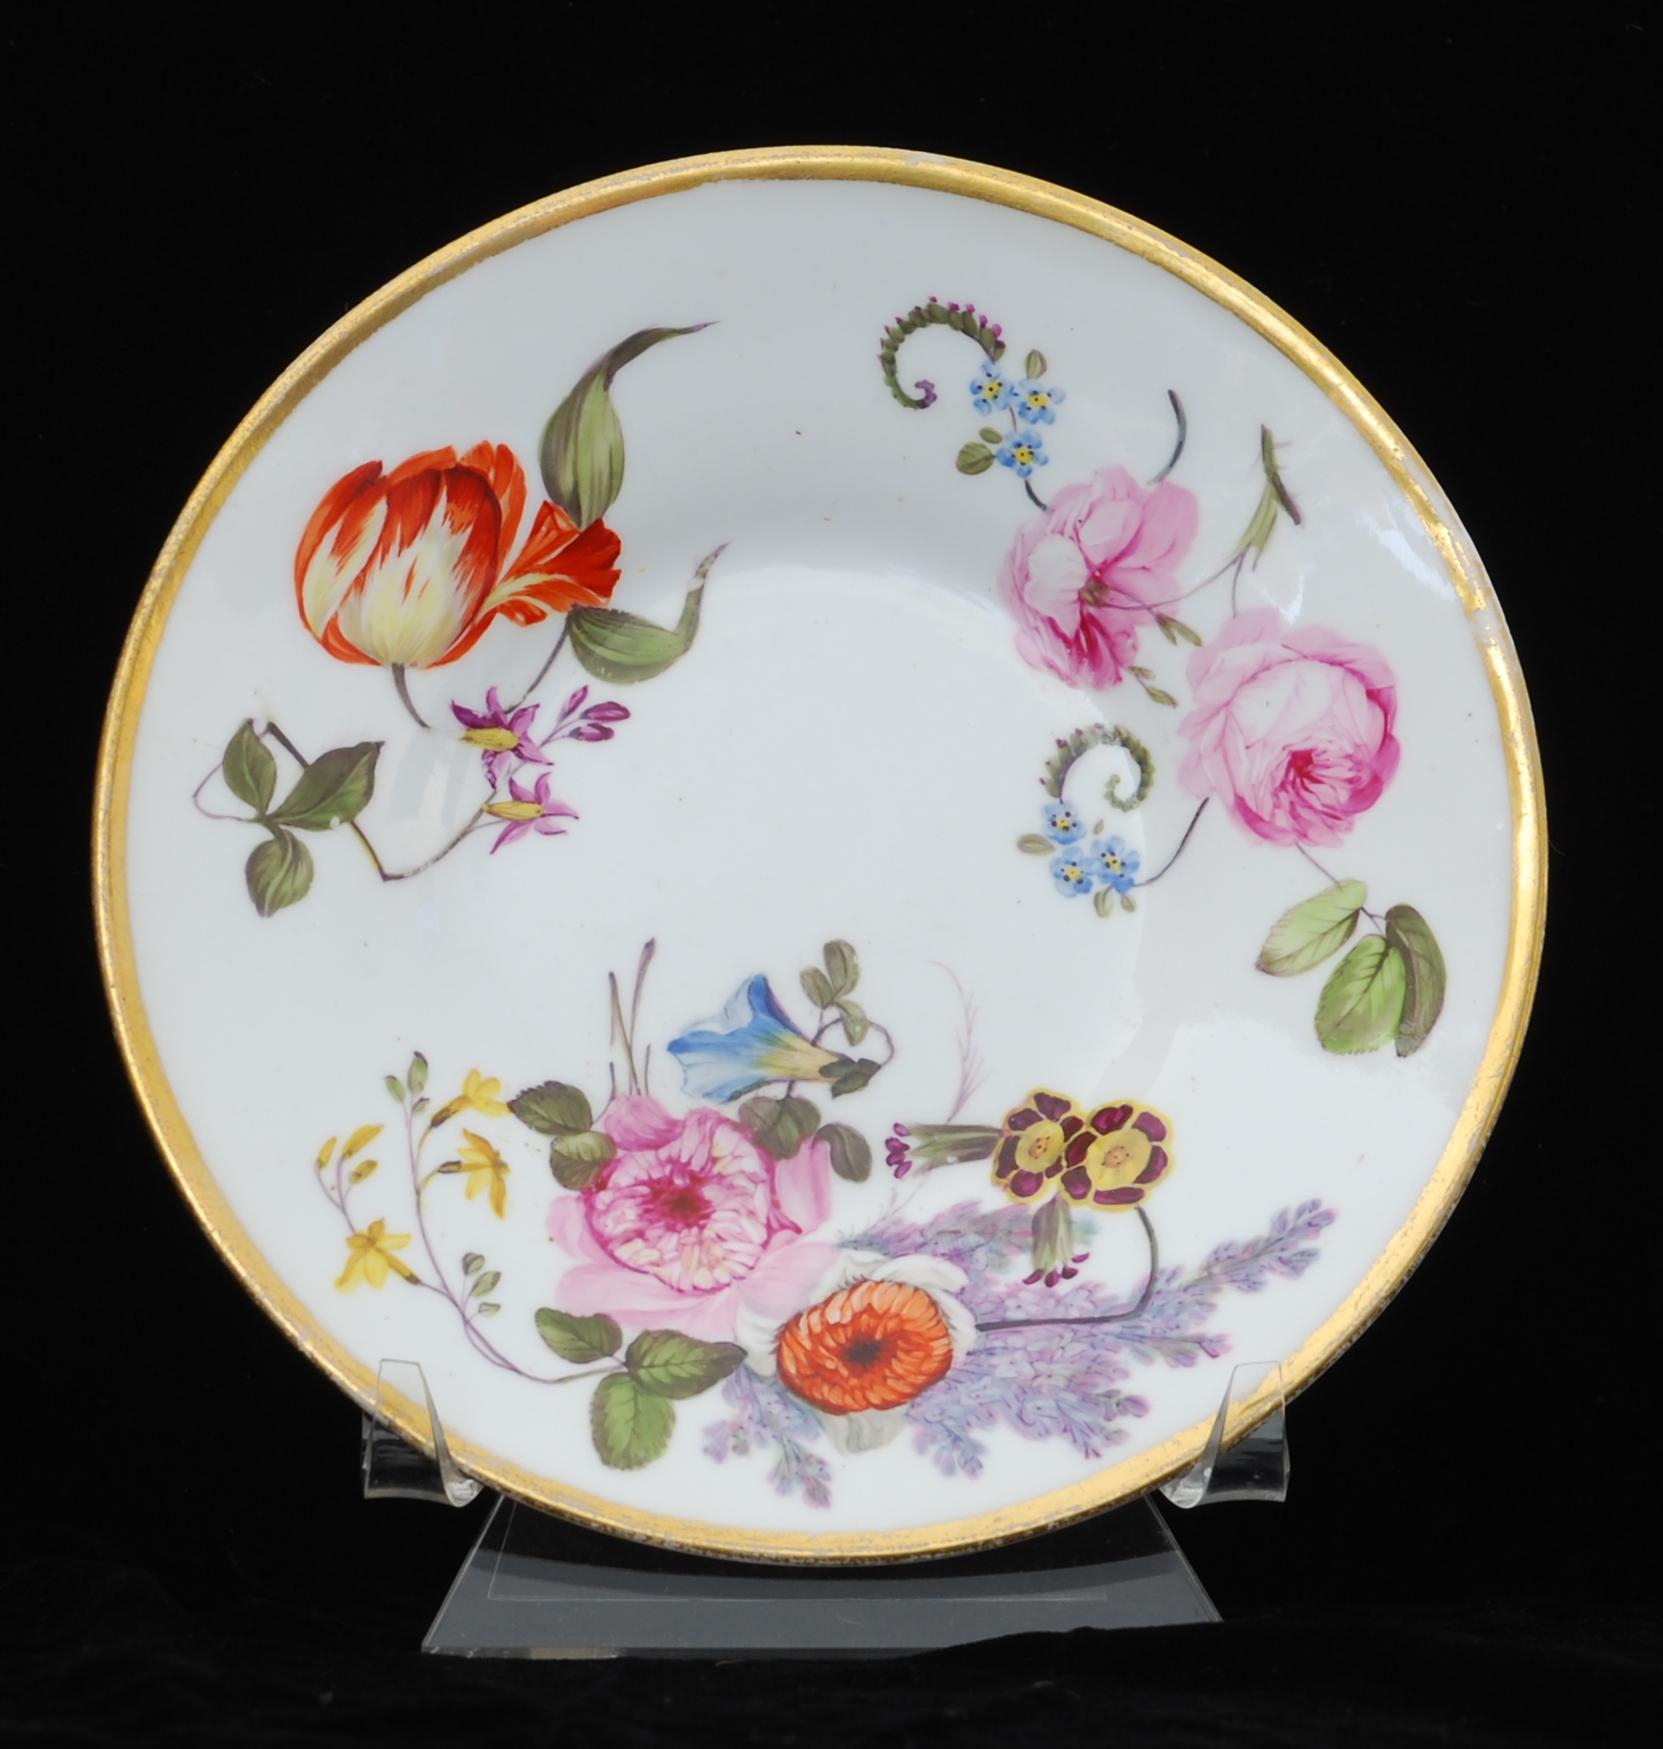 A rare coffee cup and saucer in Nantgarw’s superb soft-paste porcelain. Each piece is gilded and decorated in one of the London workshops with superb flower painting, probably by Moses Webster.

The Nantgarw factory lasted only a few years, but